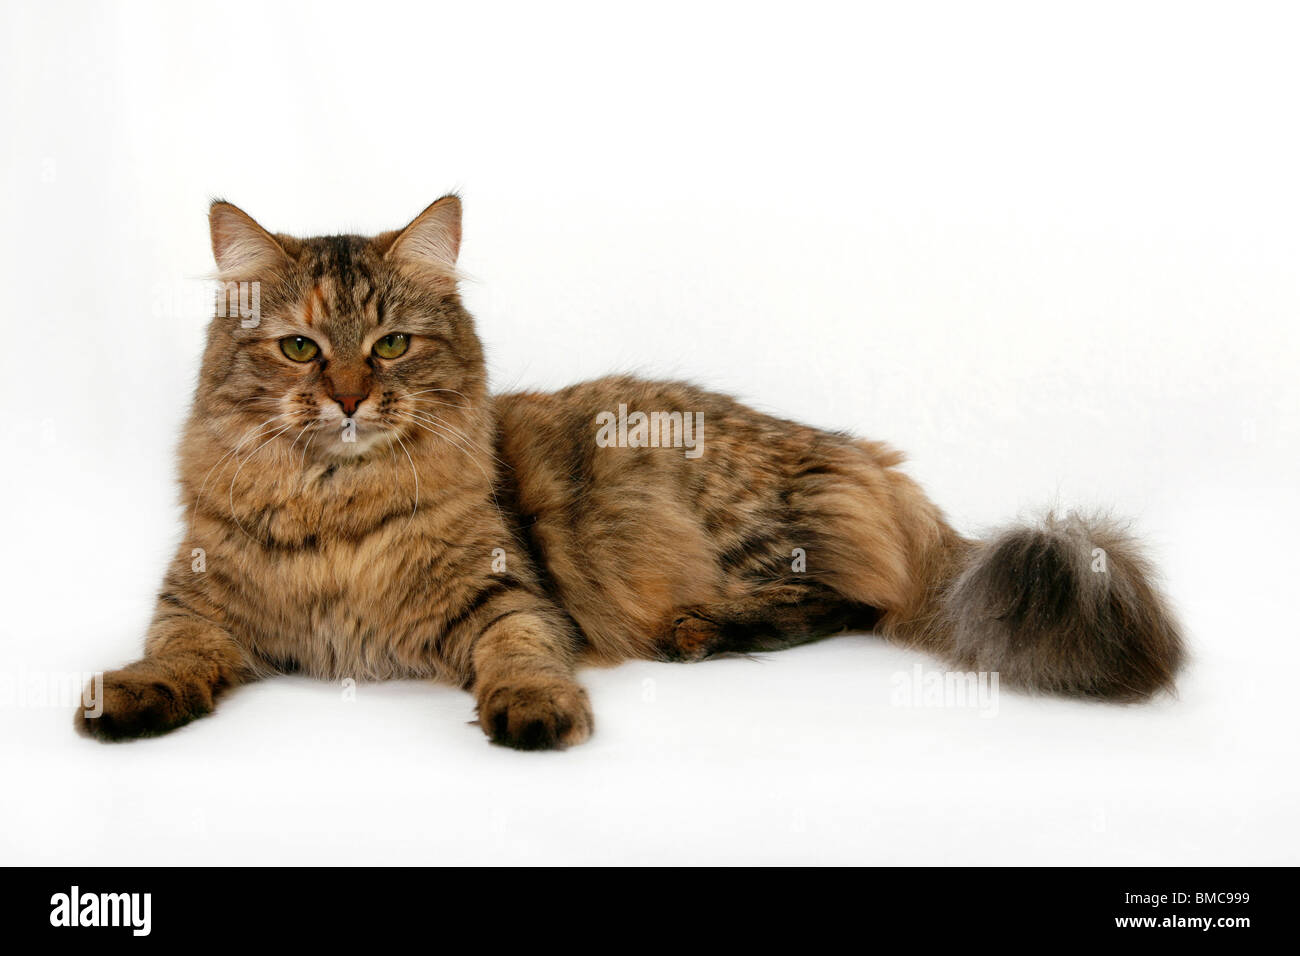 09987 hi-res stock photography and images - Alamy